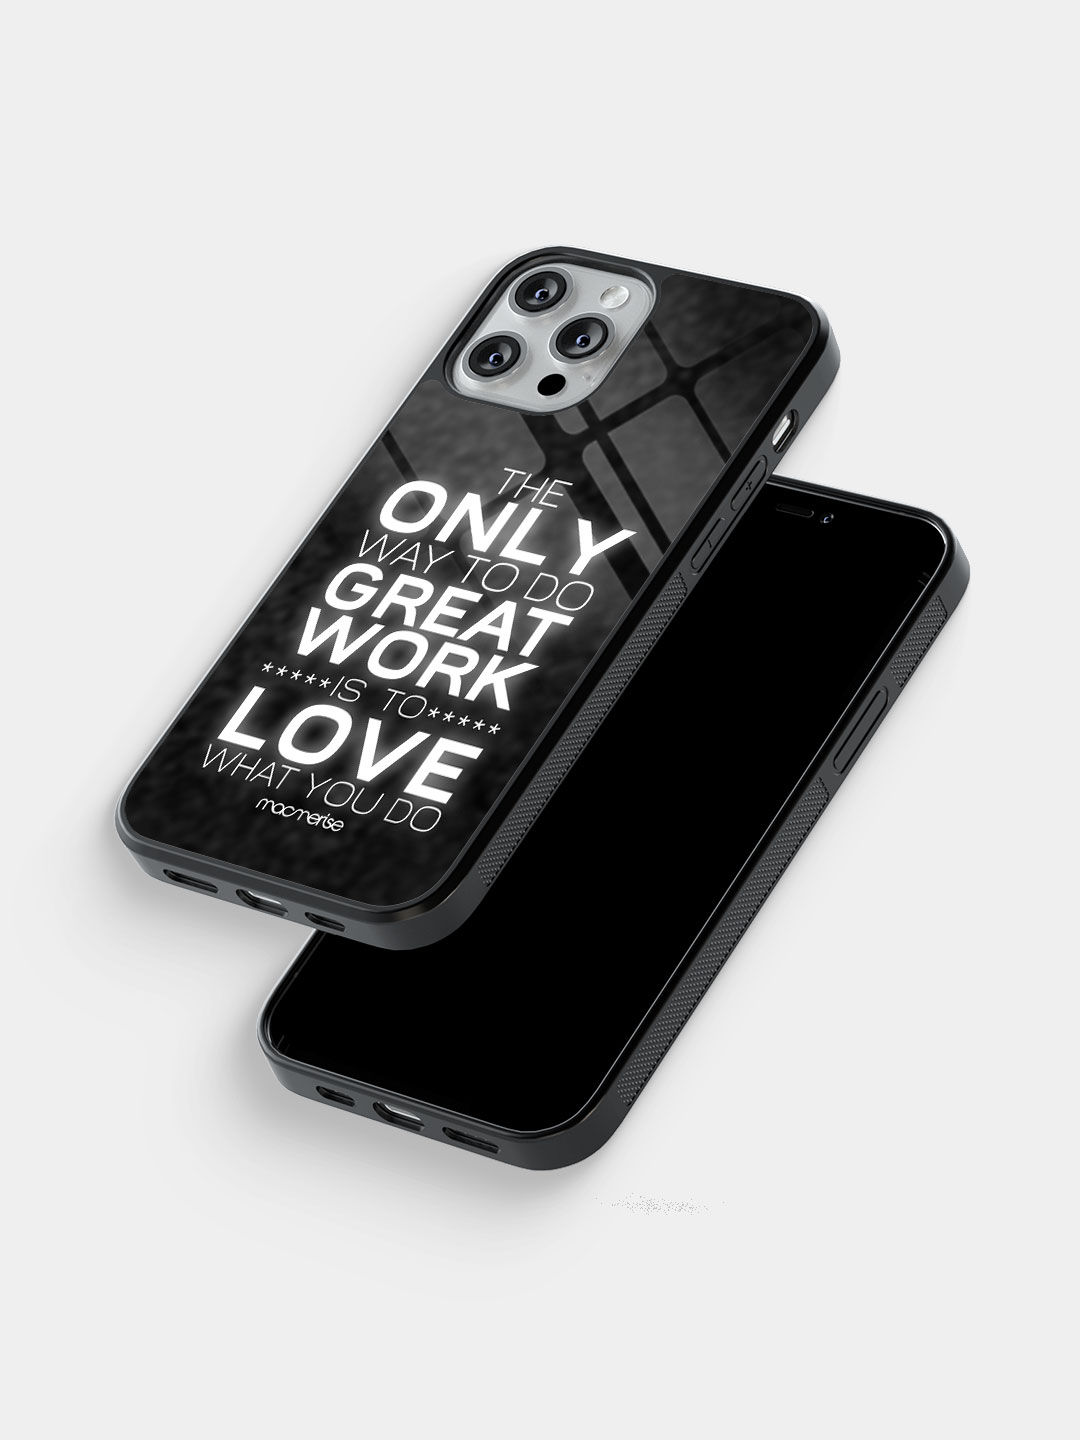 Love What You Do - Glass Case For iPhone 13 Pro Max